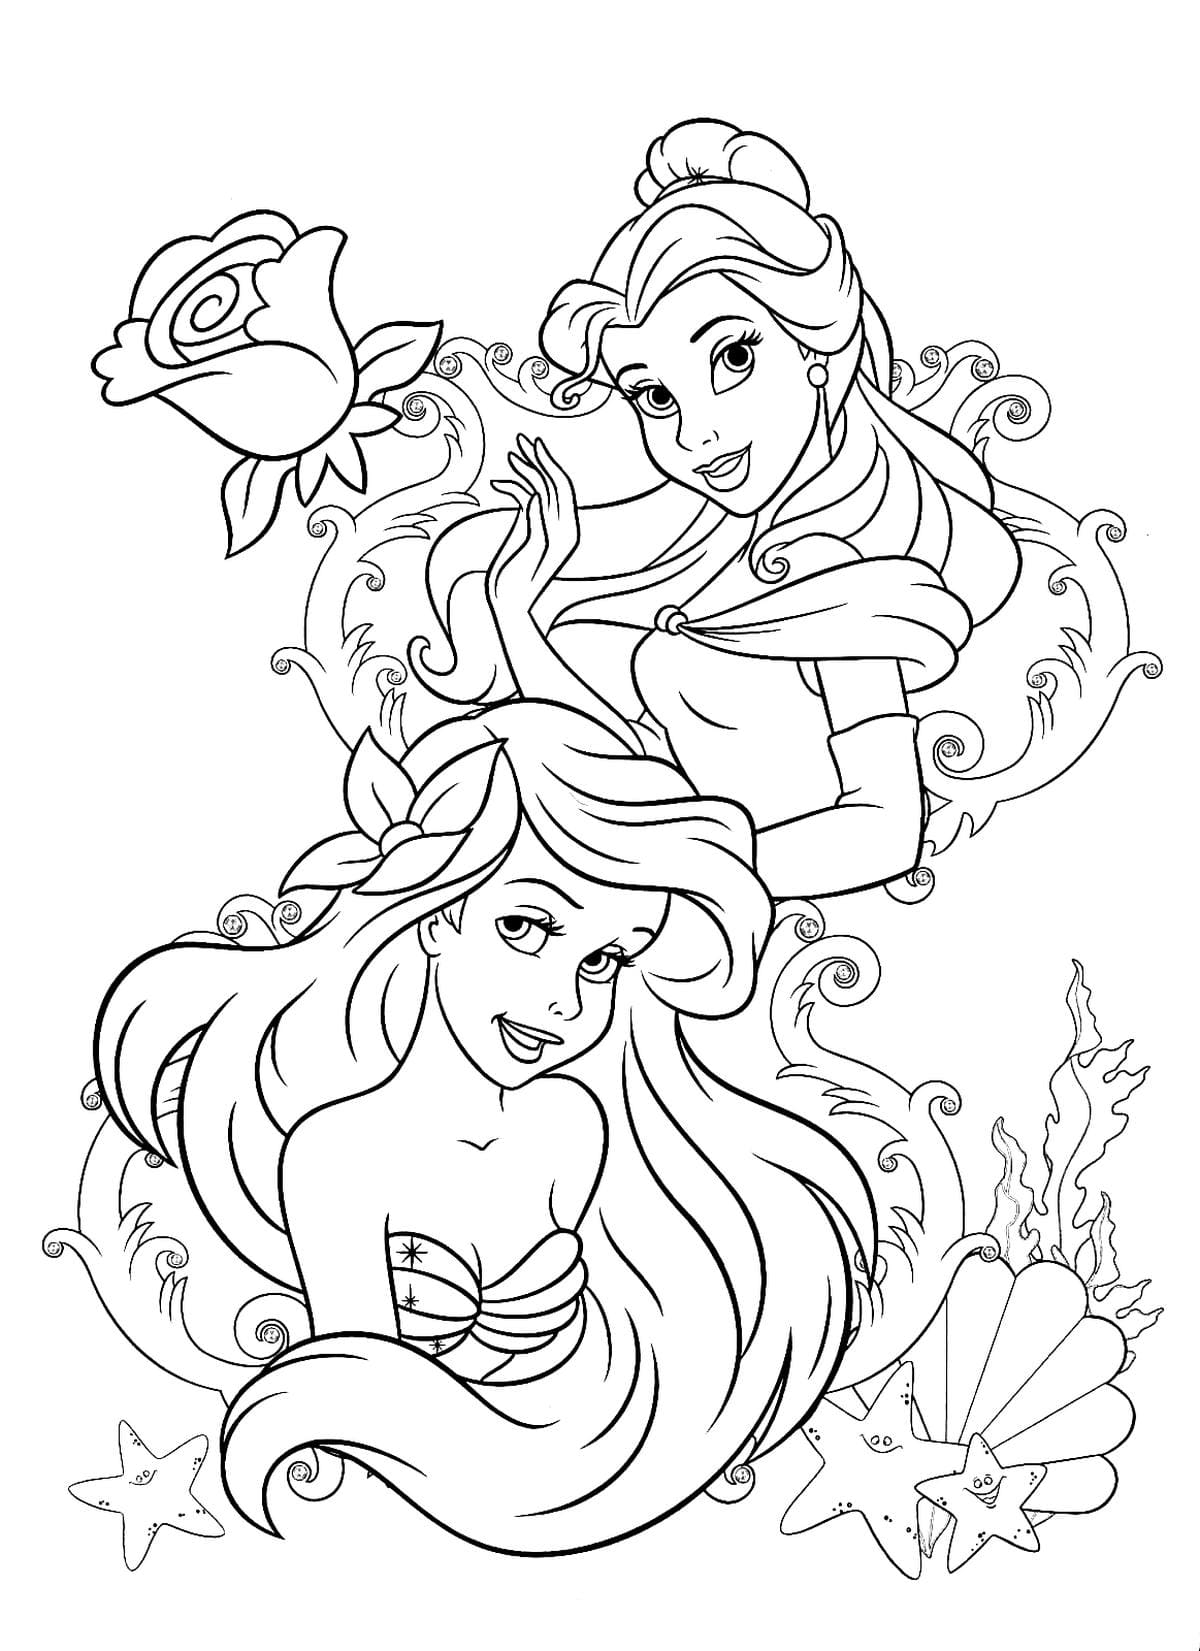 Ariel The Mermaid Coloring Pages - 100 Printable coloring pages